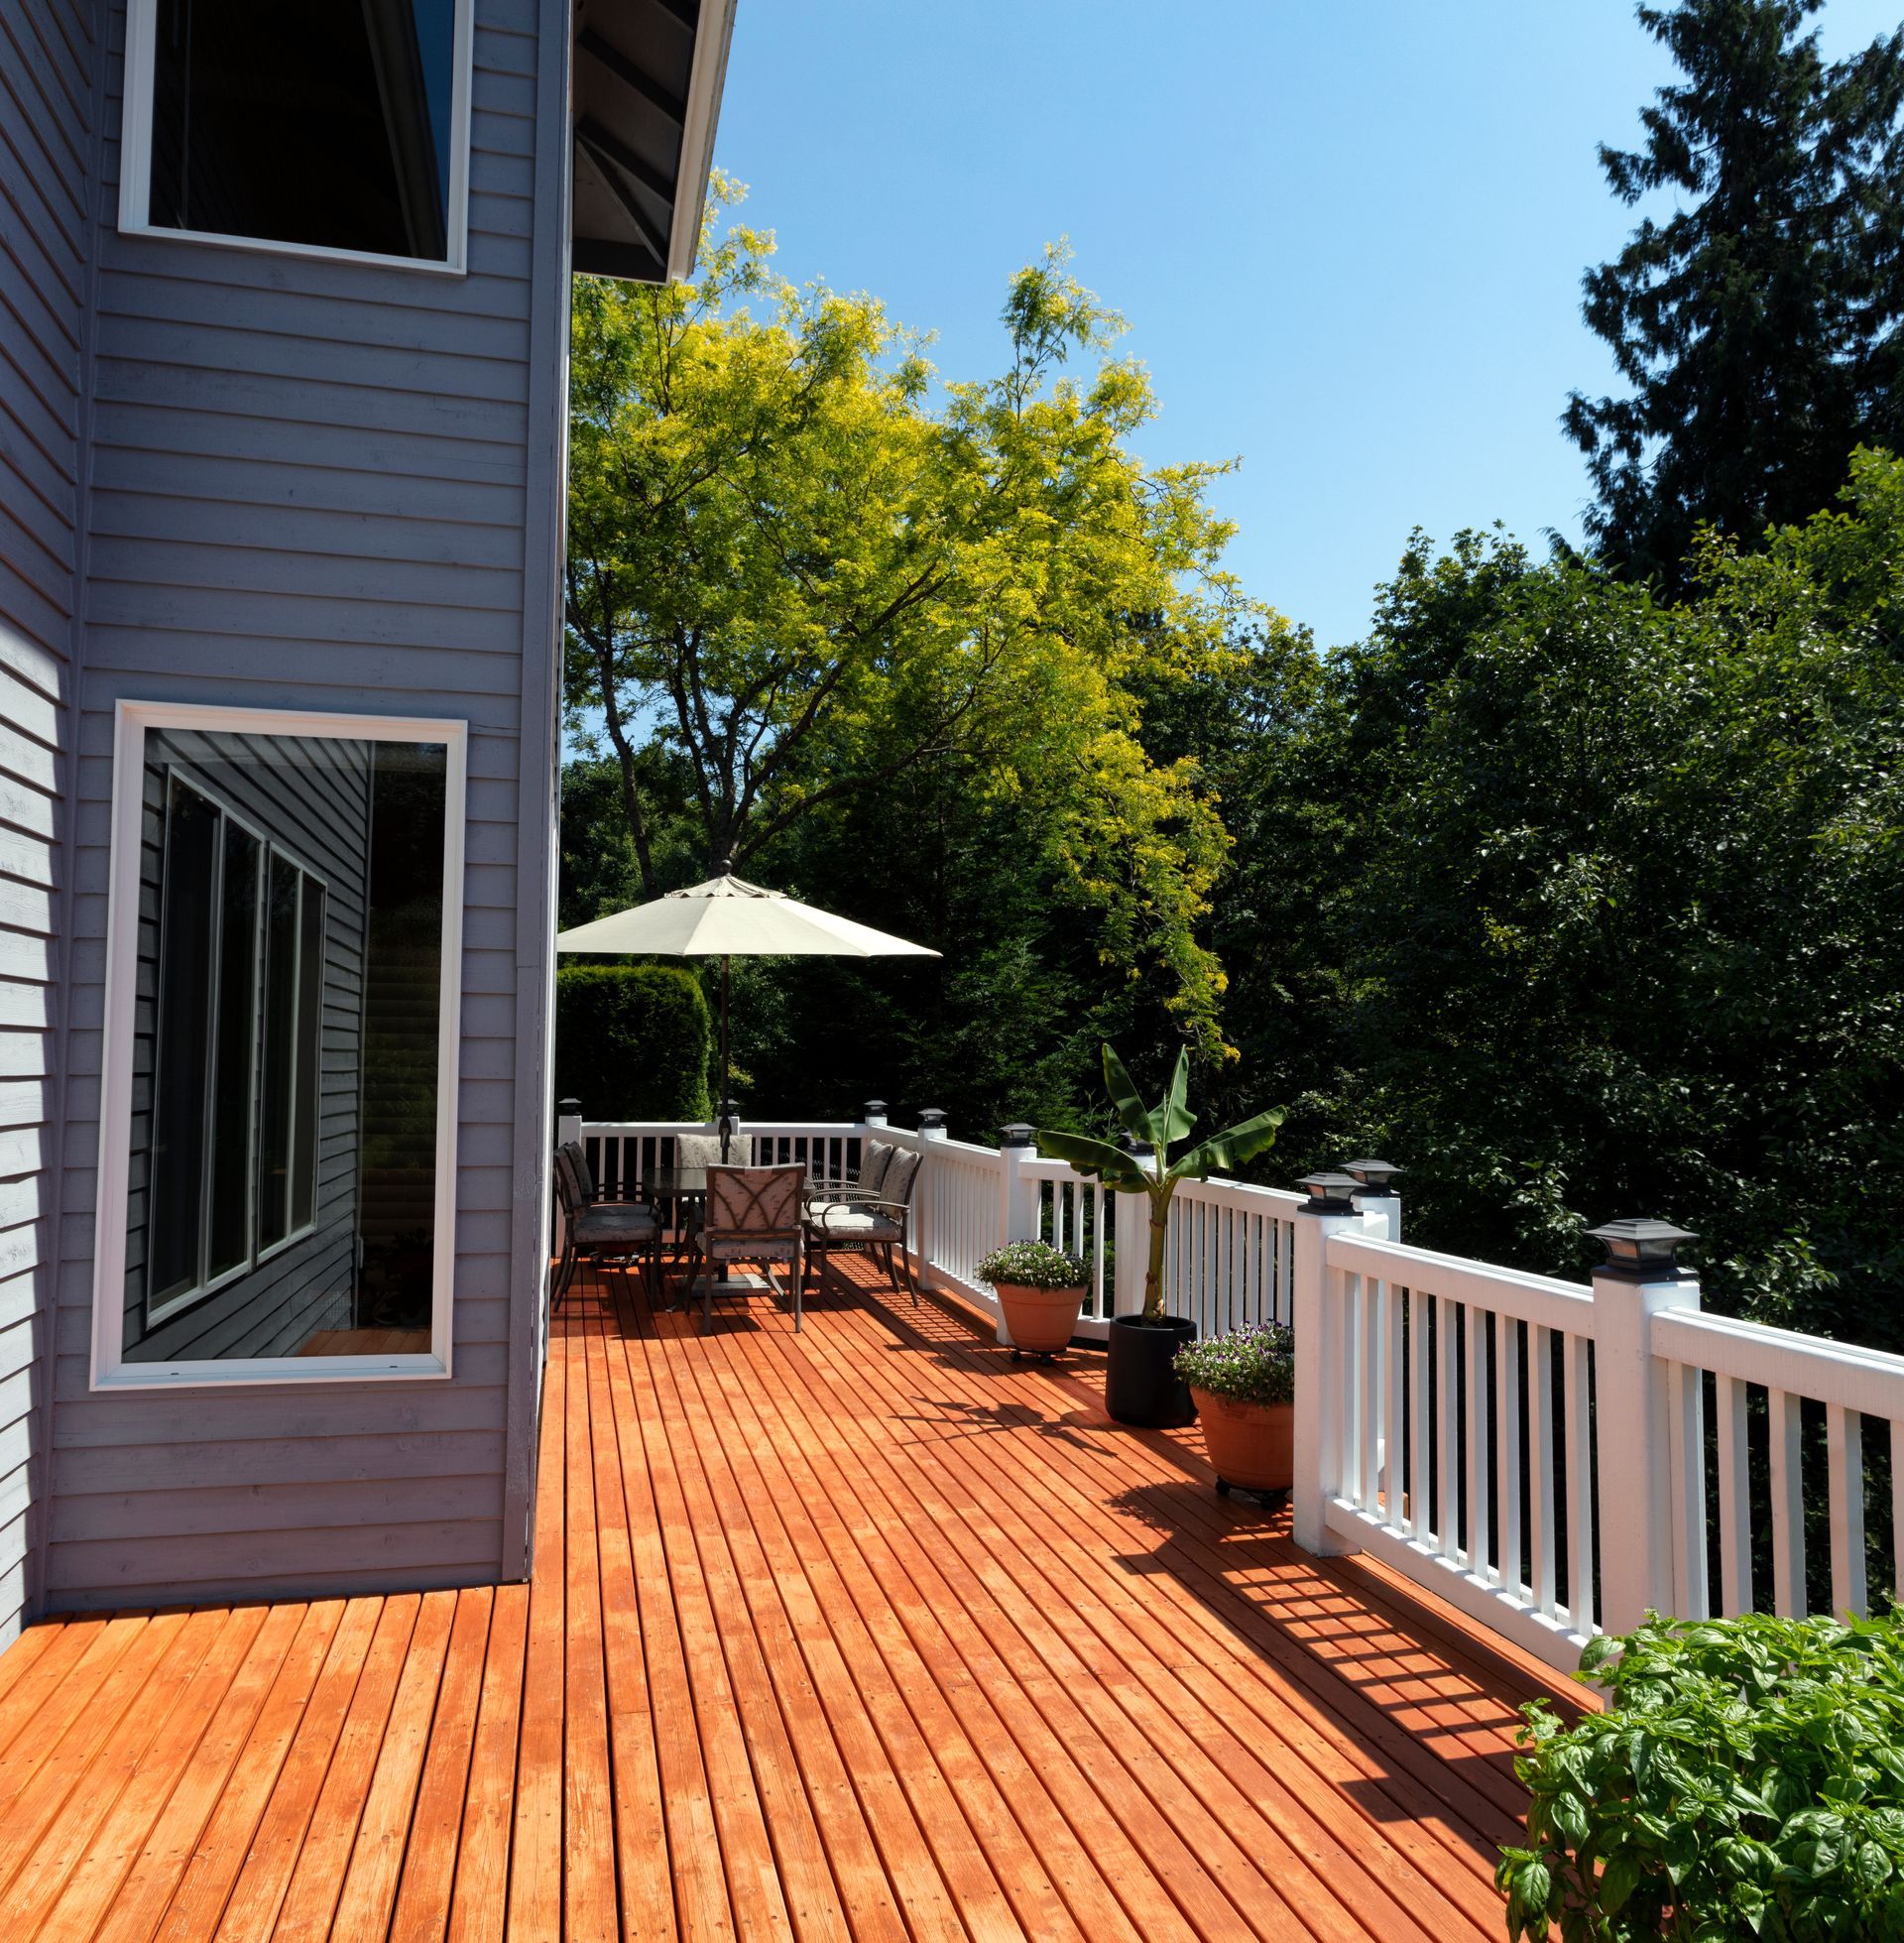 Outdoor home wooden deck during lovely summer day with seasonal garden